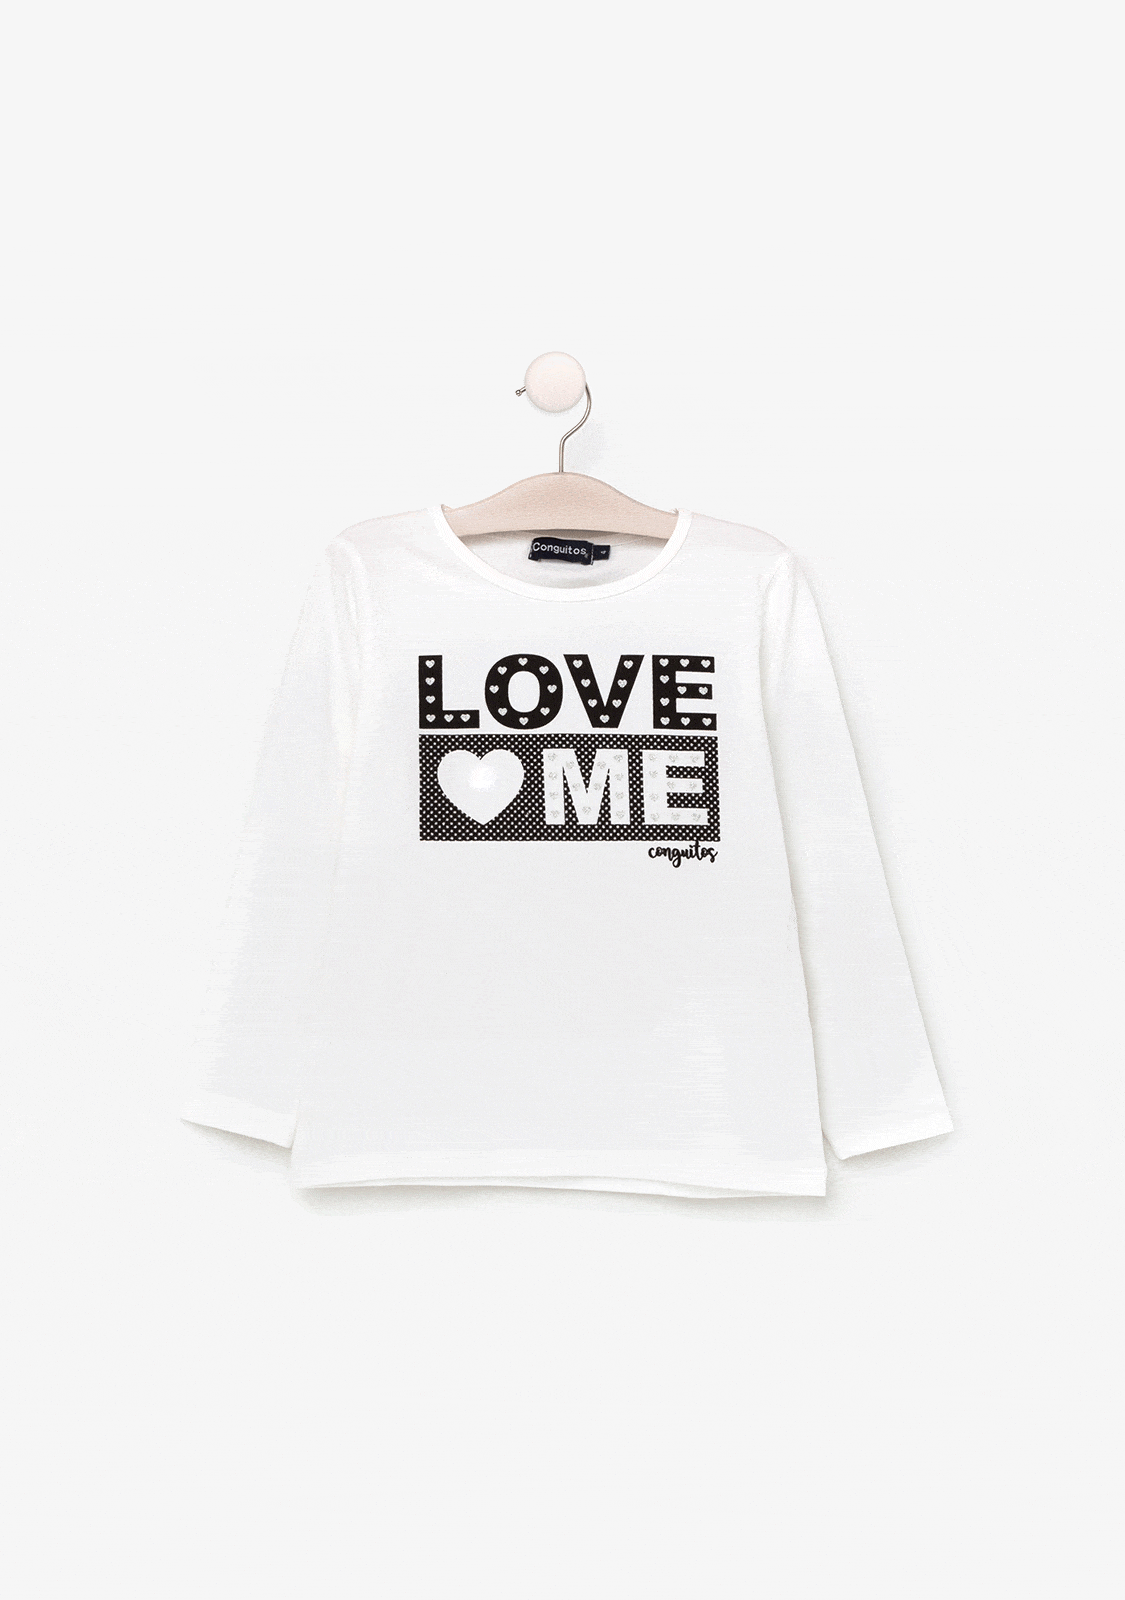 CONGUITOS TEXTIL Clothing Girl's White "Love Me" Shirt with Lights